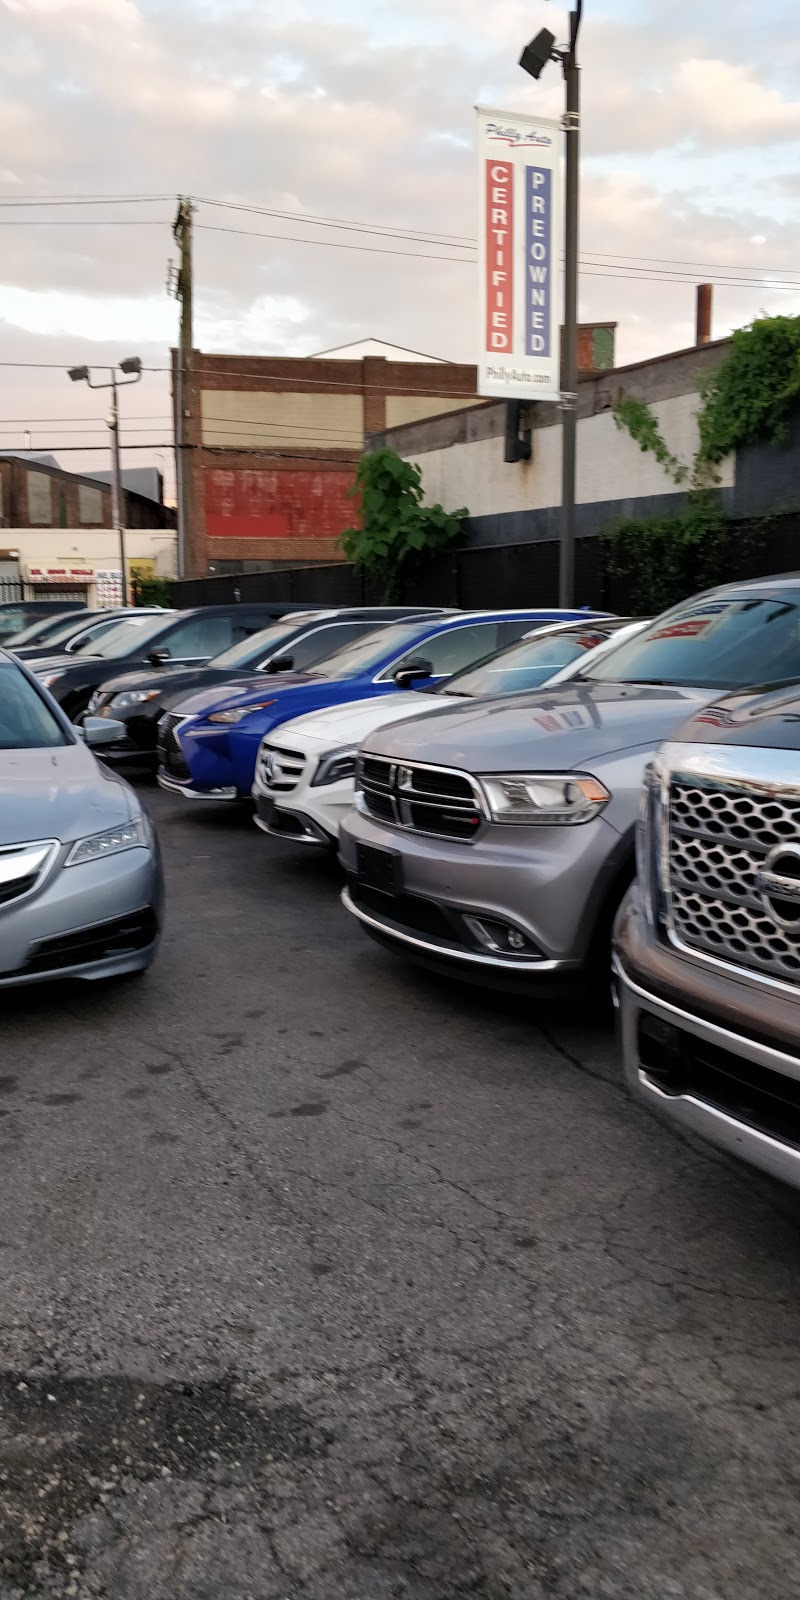 Philly Auto | 4530 Torresdale Ave, Philadelphia, PA 19124 | Phone: (215) 953-7400